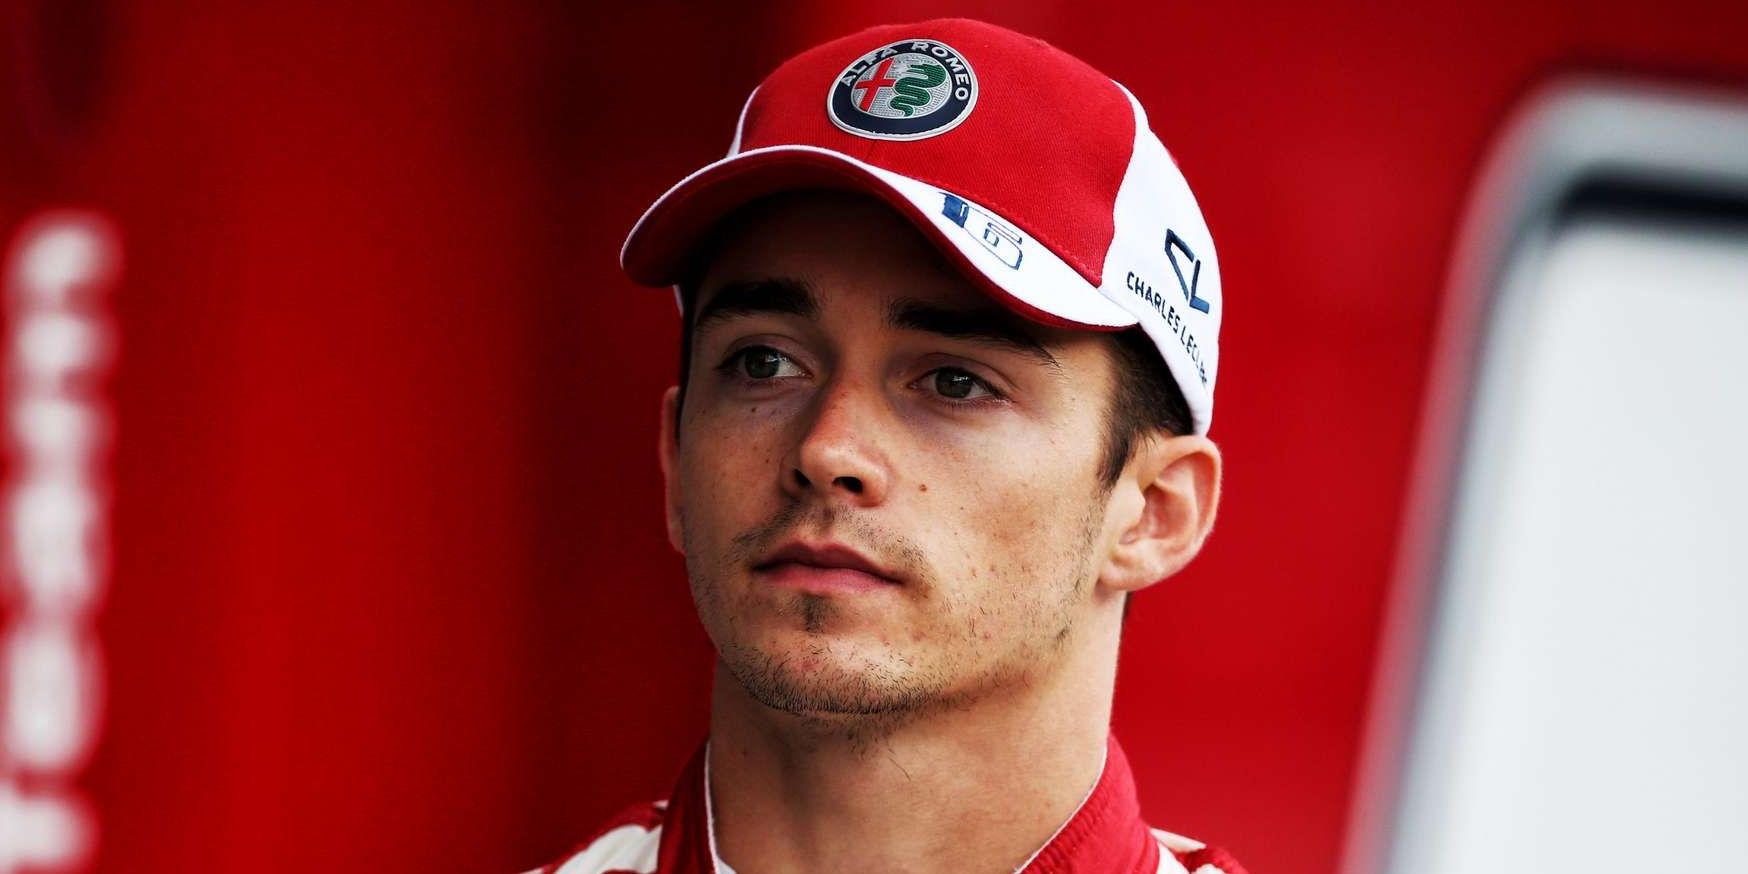 Charles Leclerc stands at the podium after a win